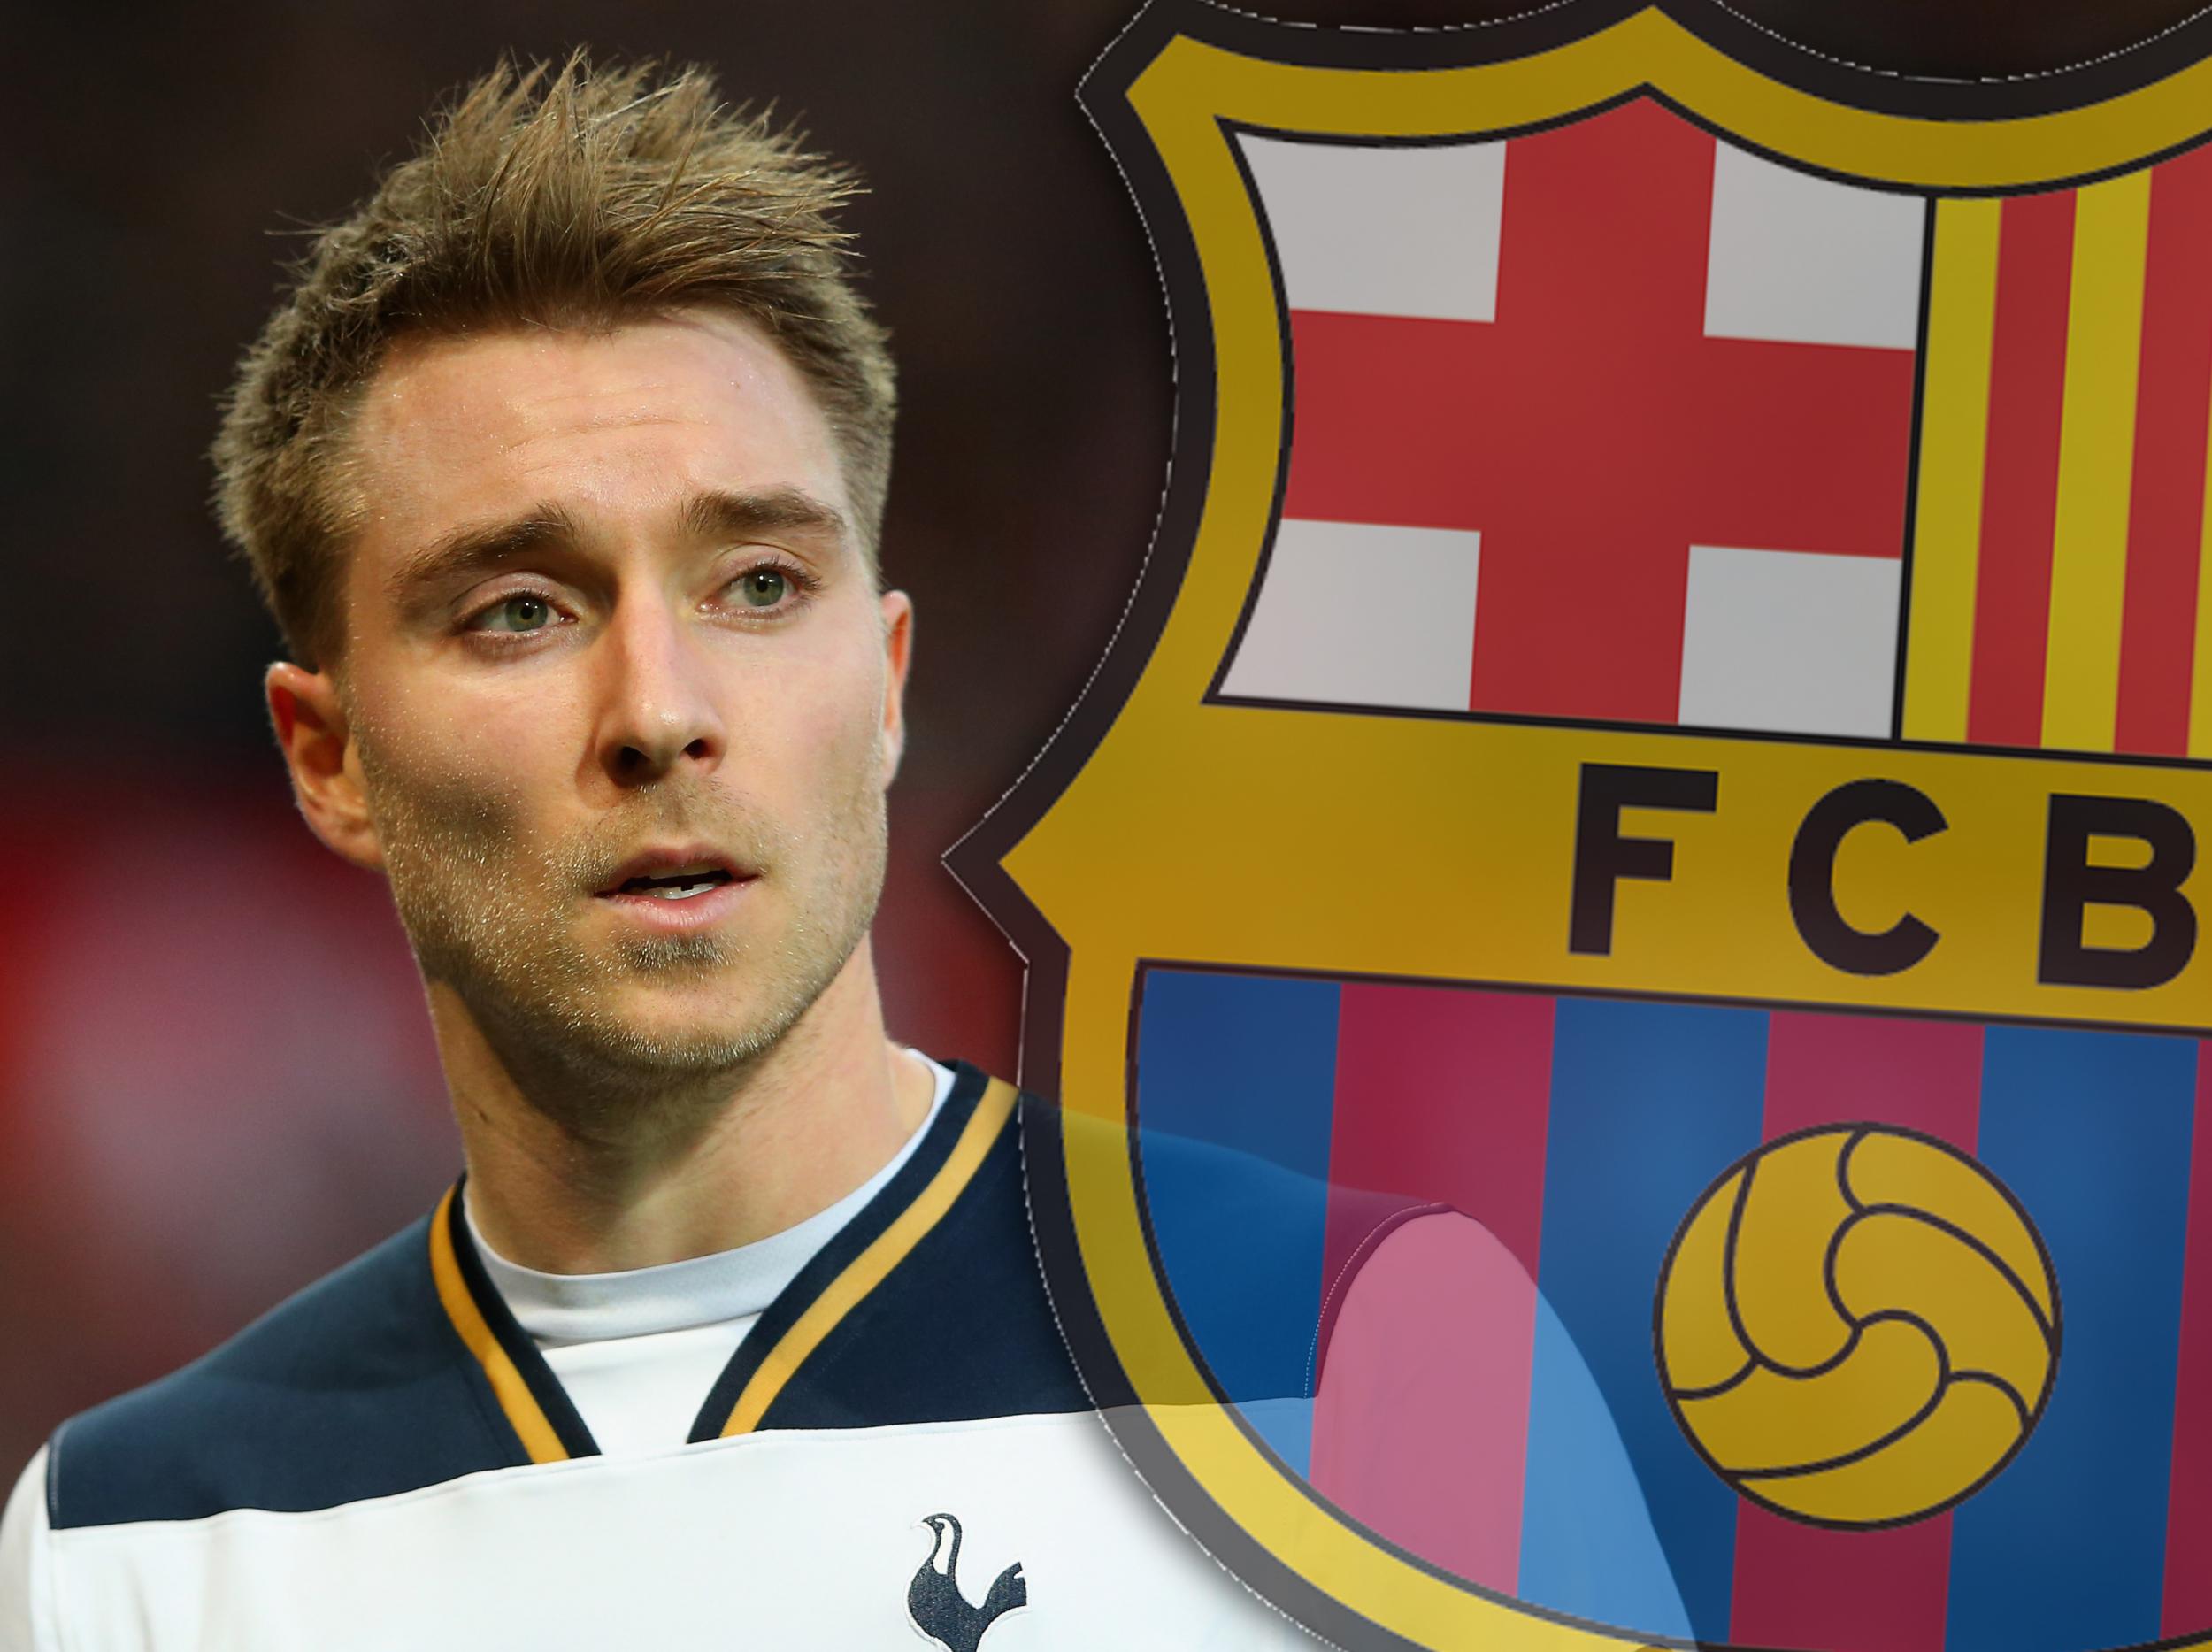 Eriksen has long been linked with a move to Barcelona